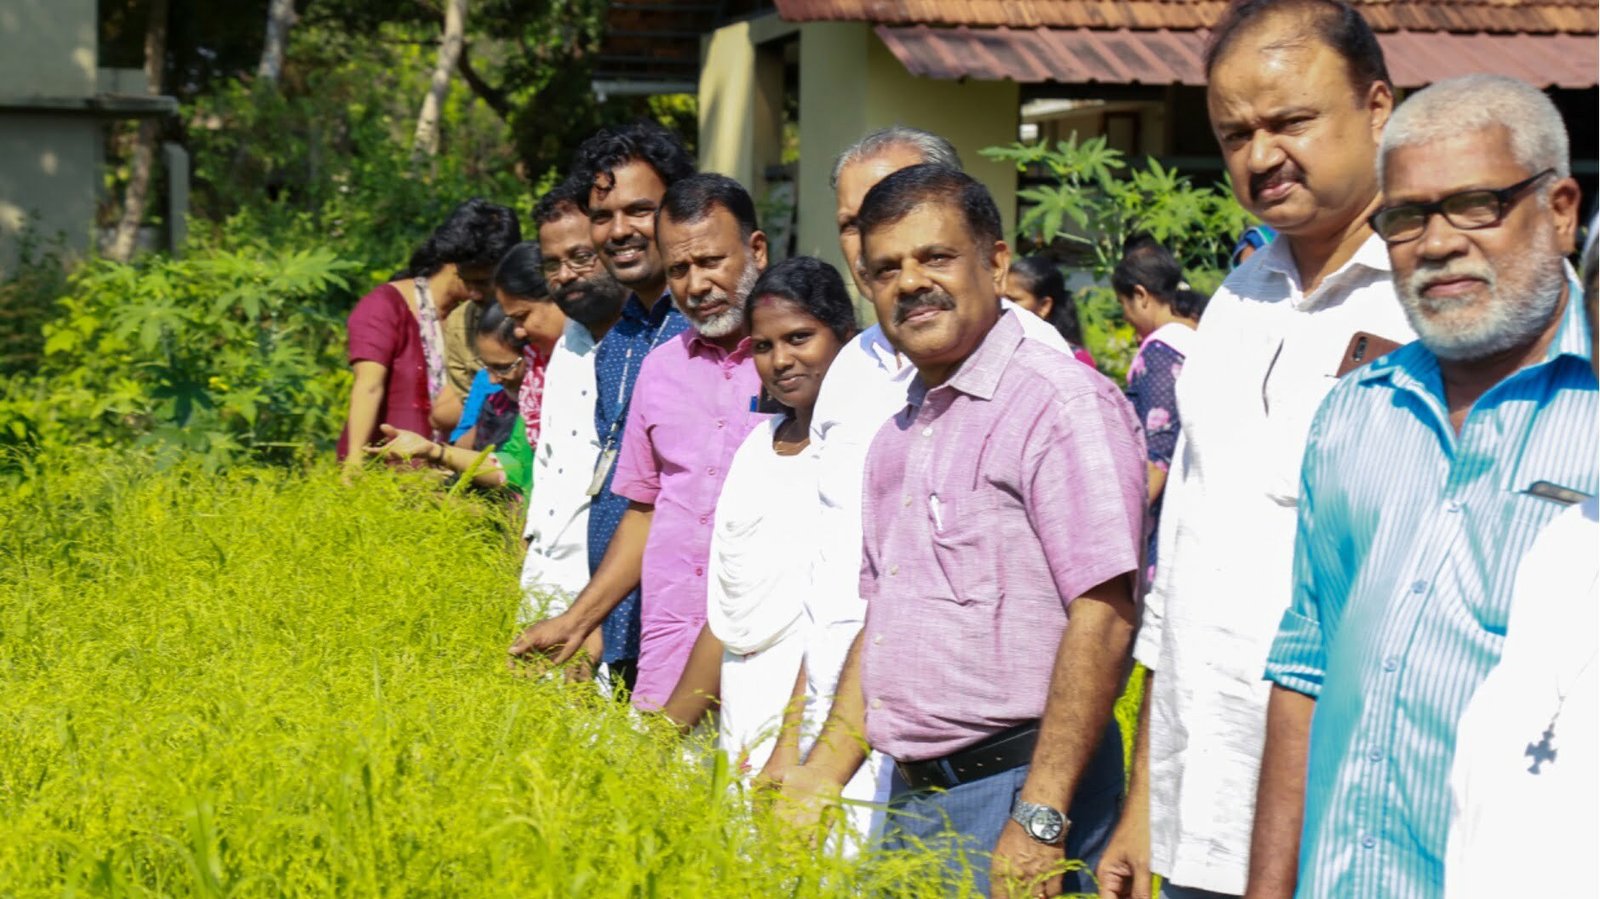 A field at Kottuvalli panchayat in Kerala where millets were successfully grown by farmers on a trial basis.